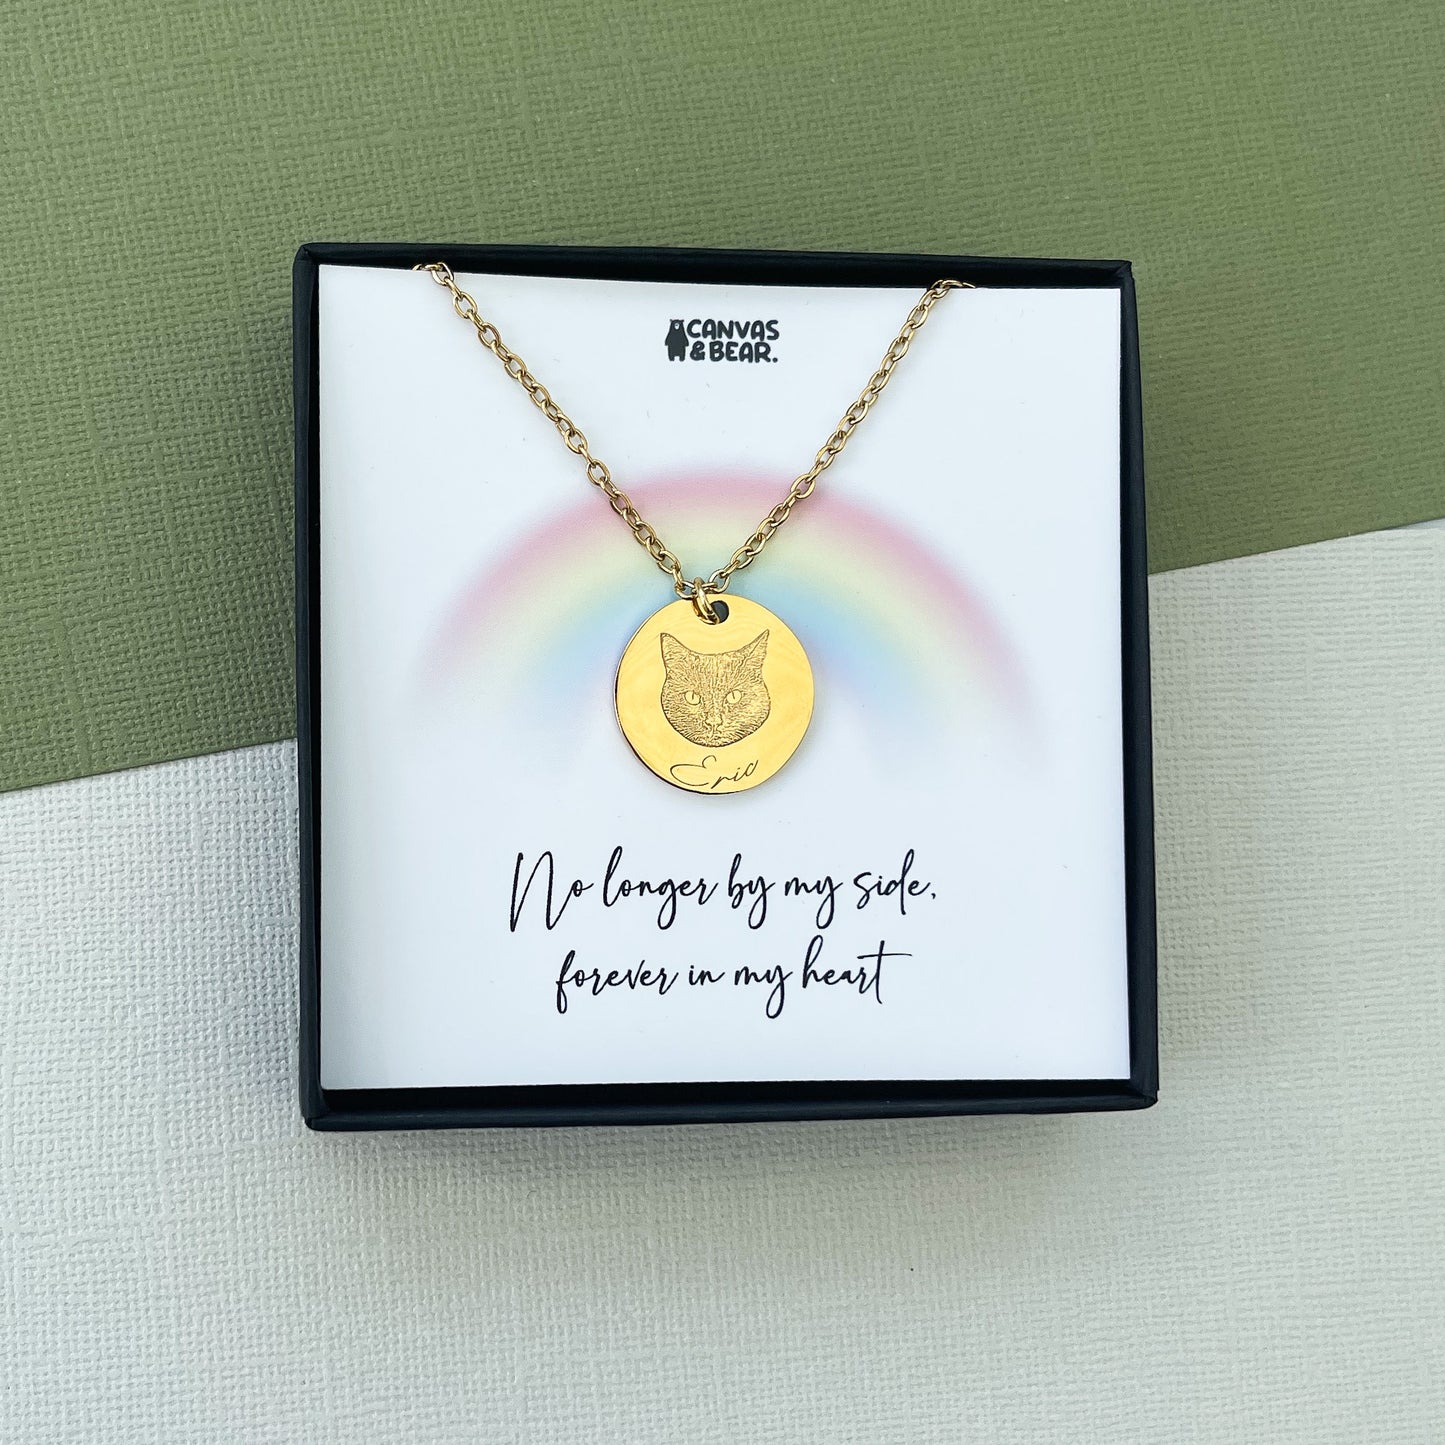 An example of a personalised necklace. A gold necklace with a cat engraved with the name Eric  below. This image features a gift bow with a gift card reading "no longer by my side, forever in my heart' with a light rainbow above